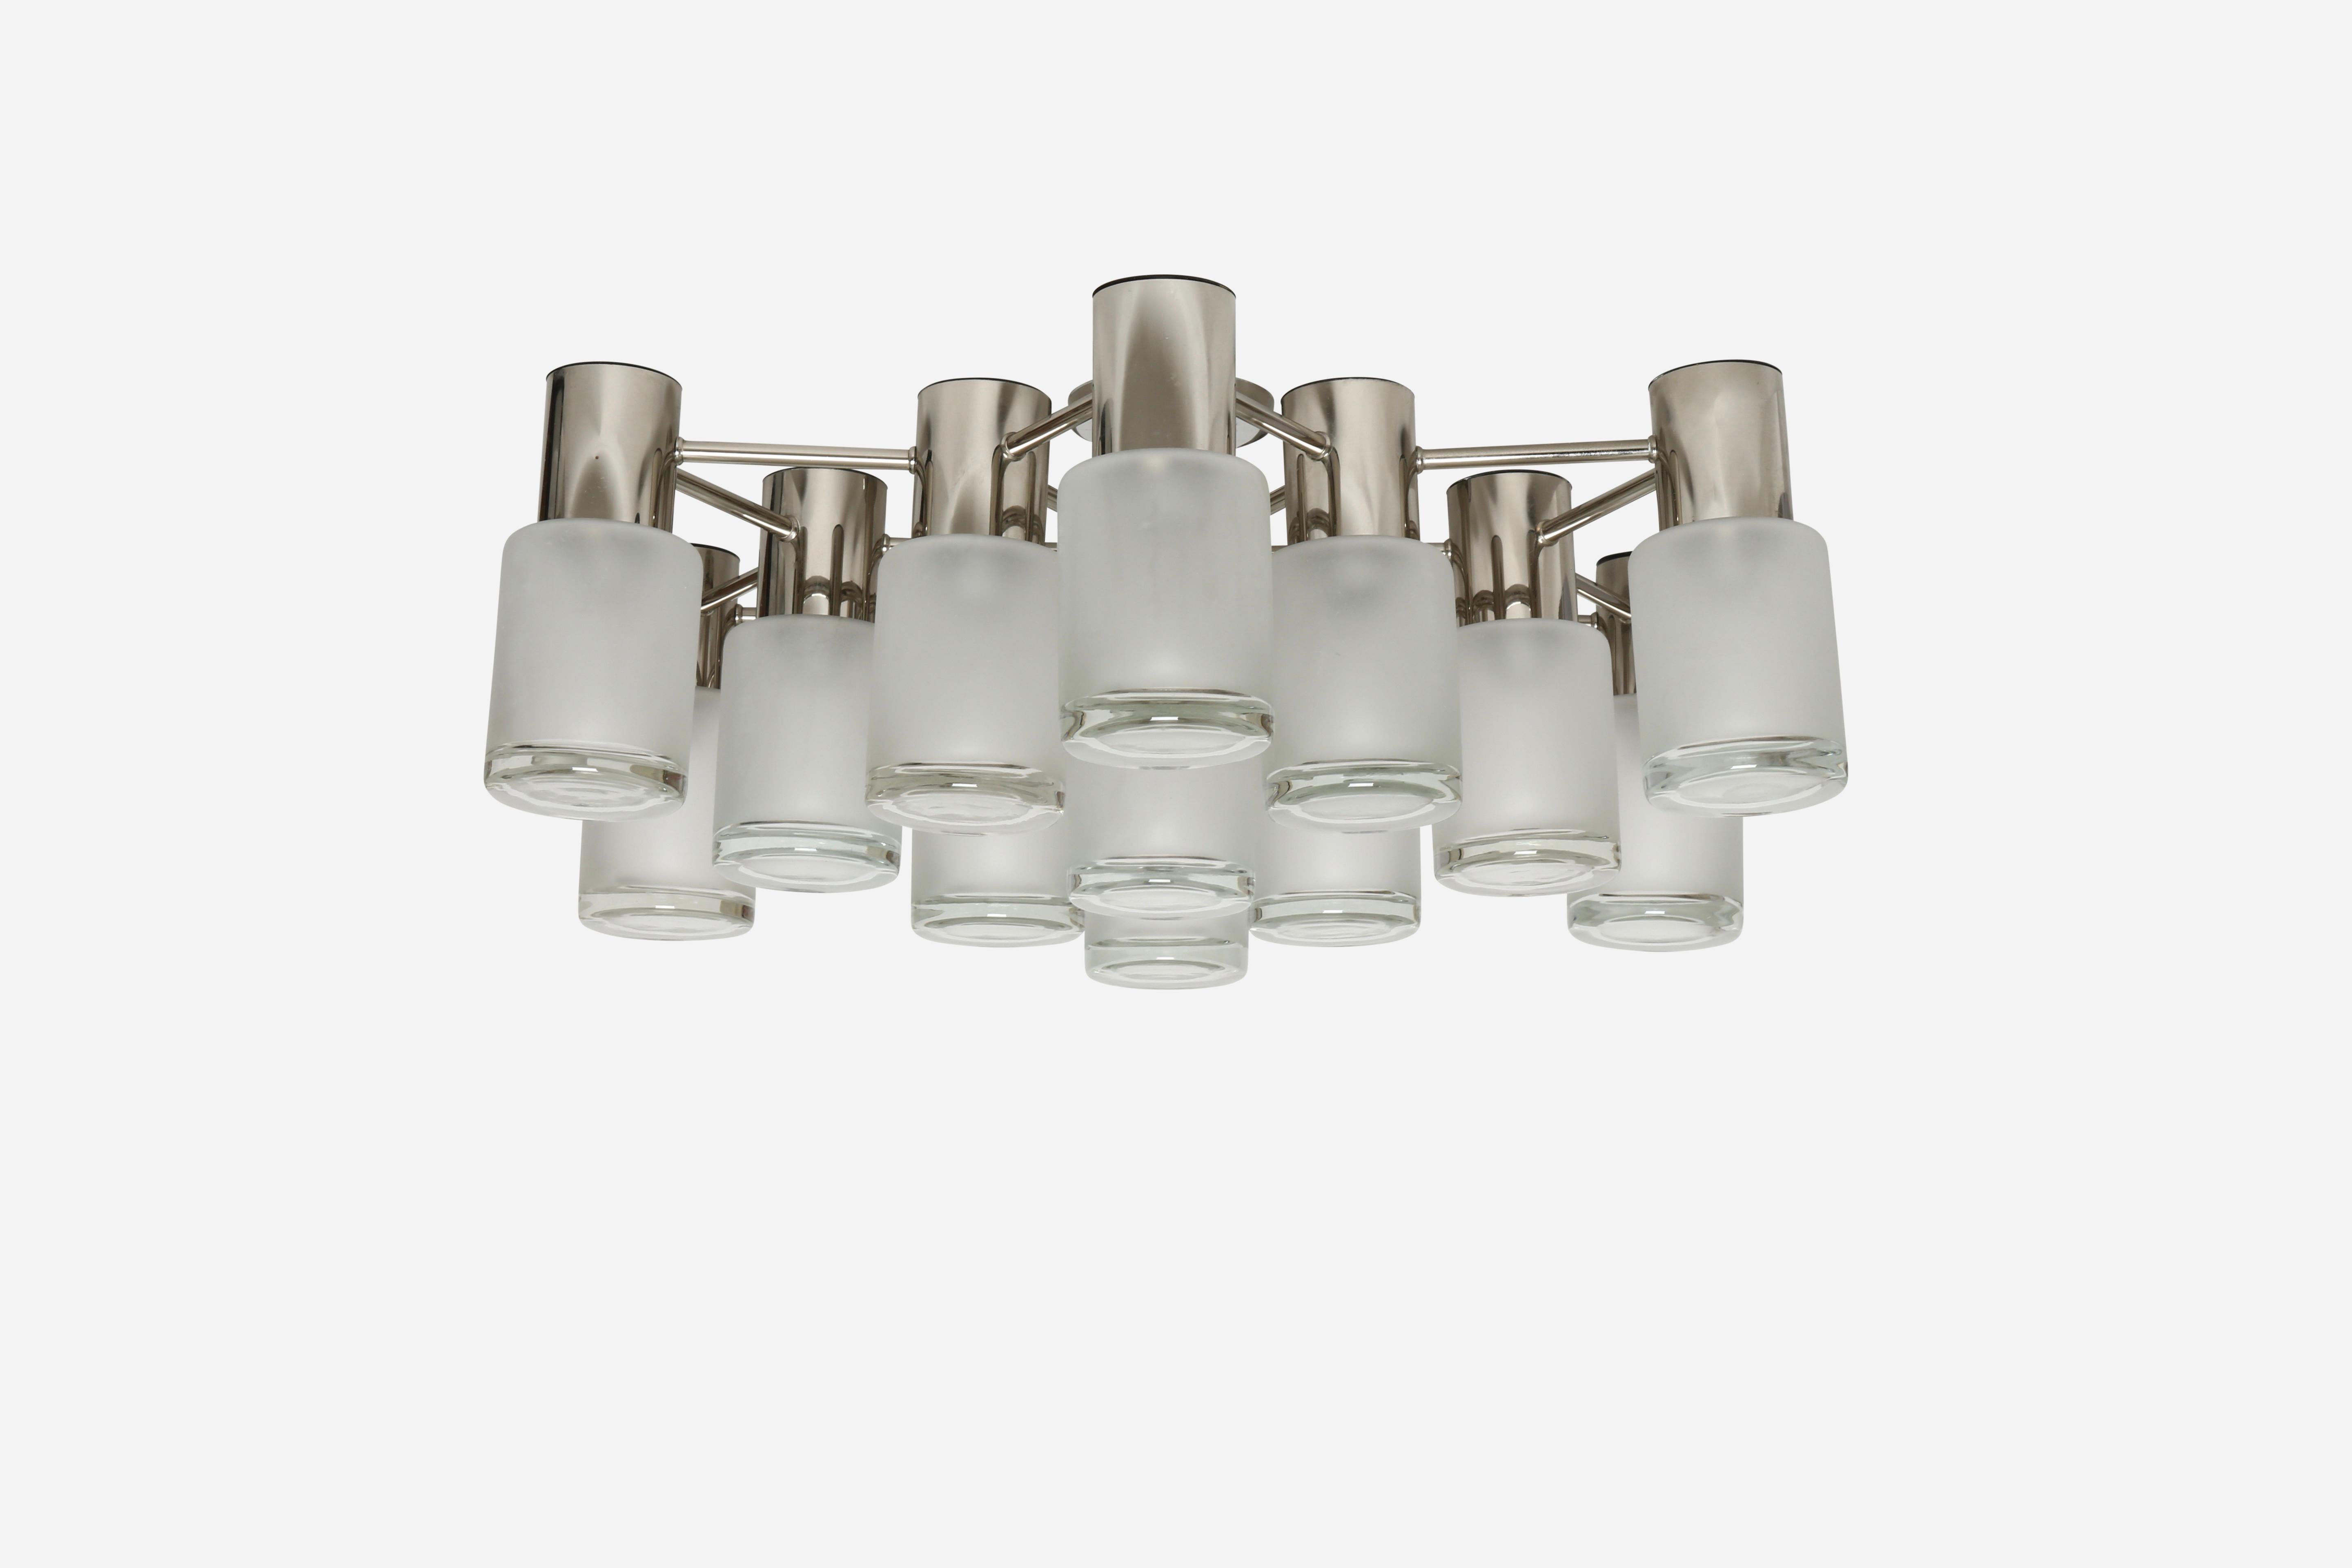 Sciolari flush mount by Leola in chrome and glass, attributed.
13 candelabra sockets.
Complimentary US rewiring upon request.

We take pride in bringing vintage fixtures to their full glory again.
At Illustris Lighting our main focus is to deliver